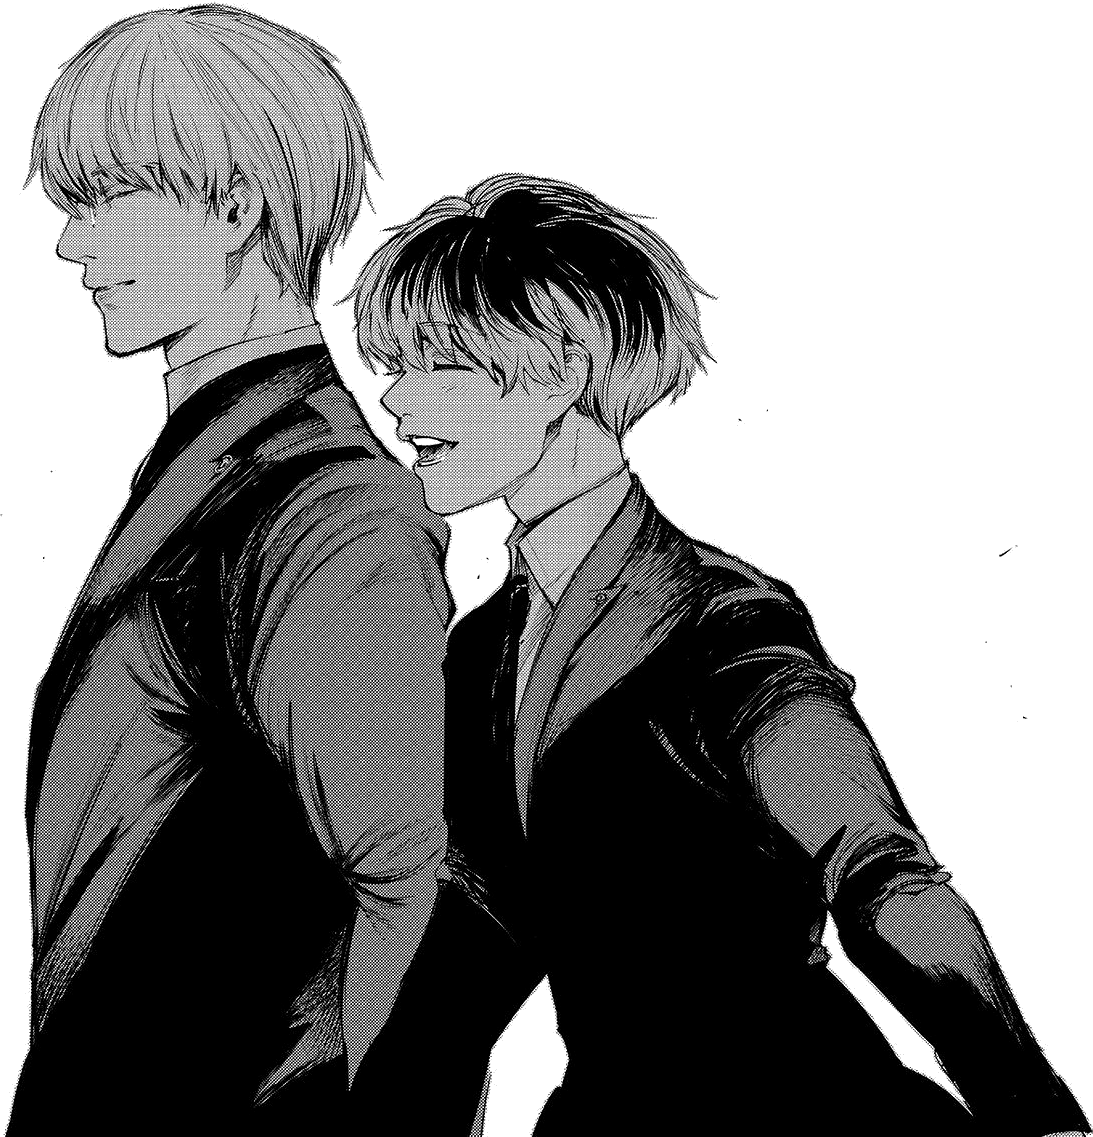 wait what — Arima, the One Eyed King and leader of Aogiri Tree